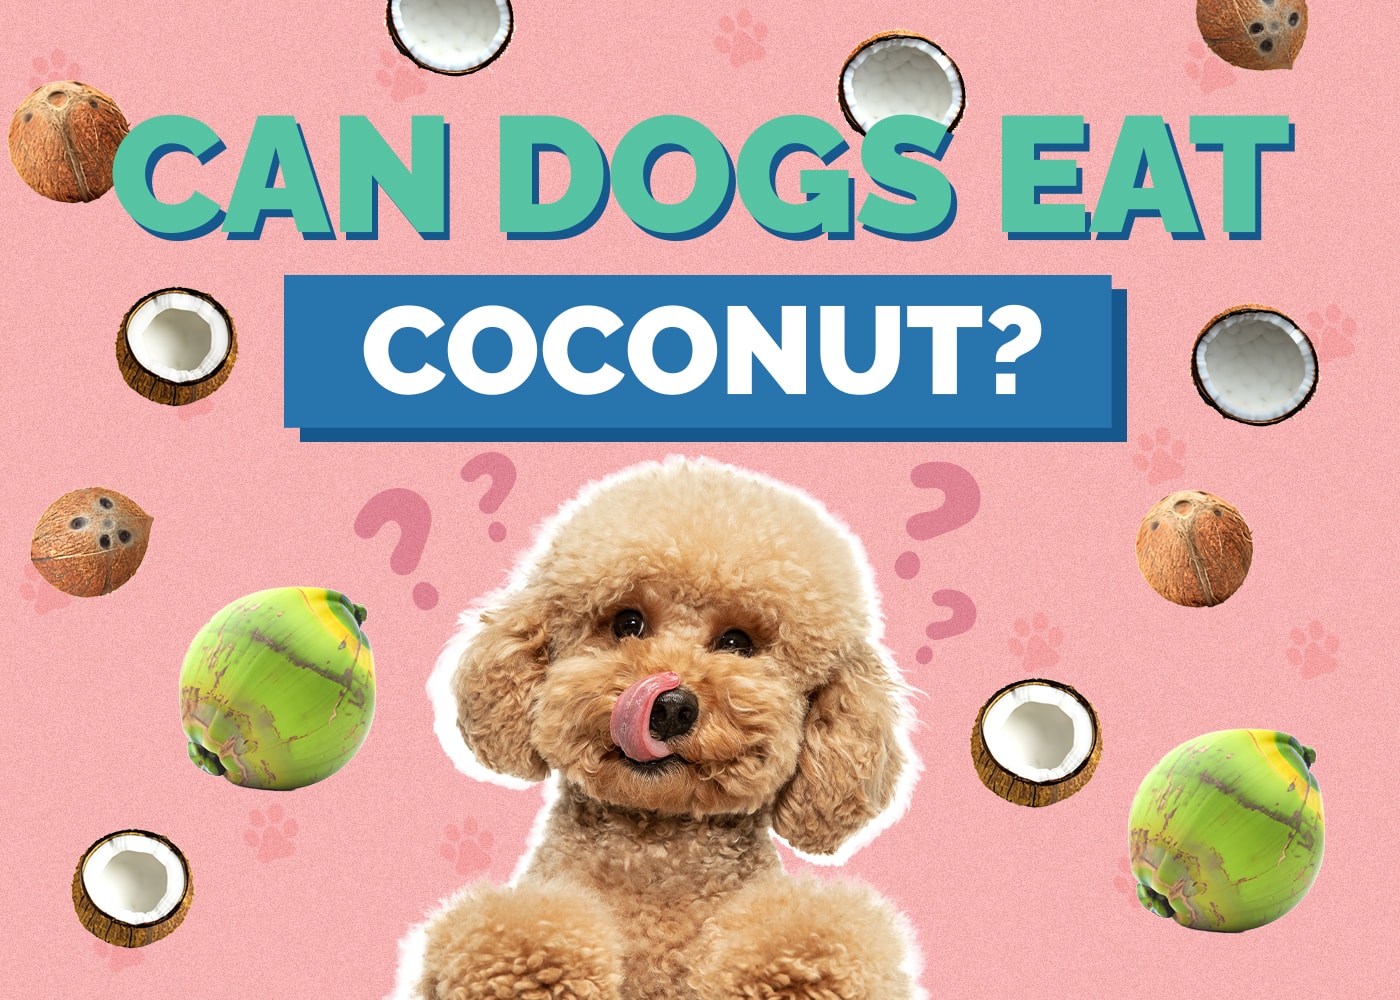 Can Dog Eat coconut